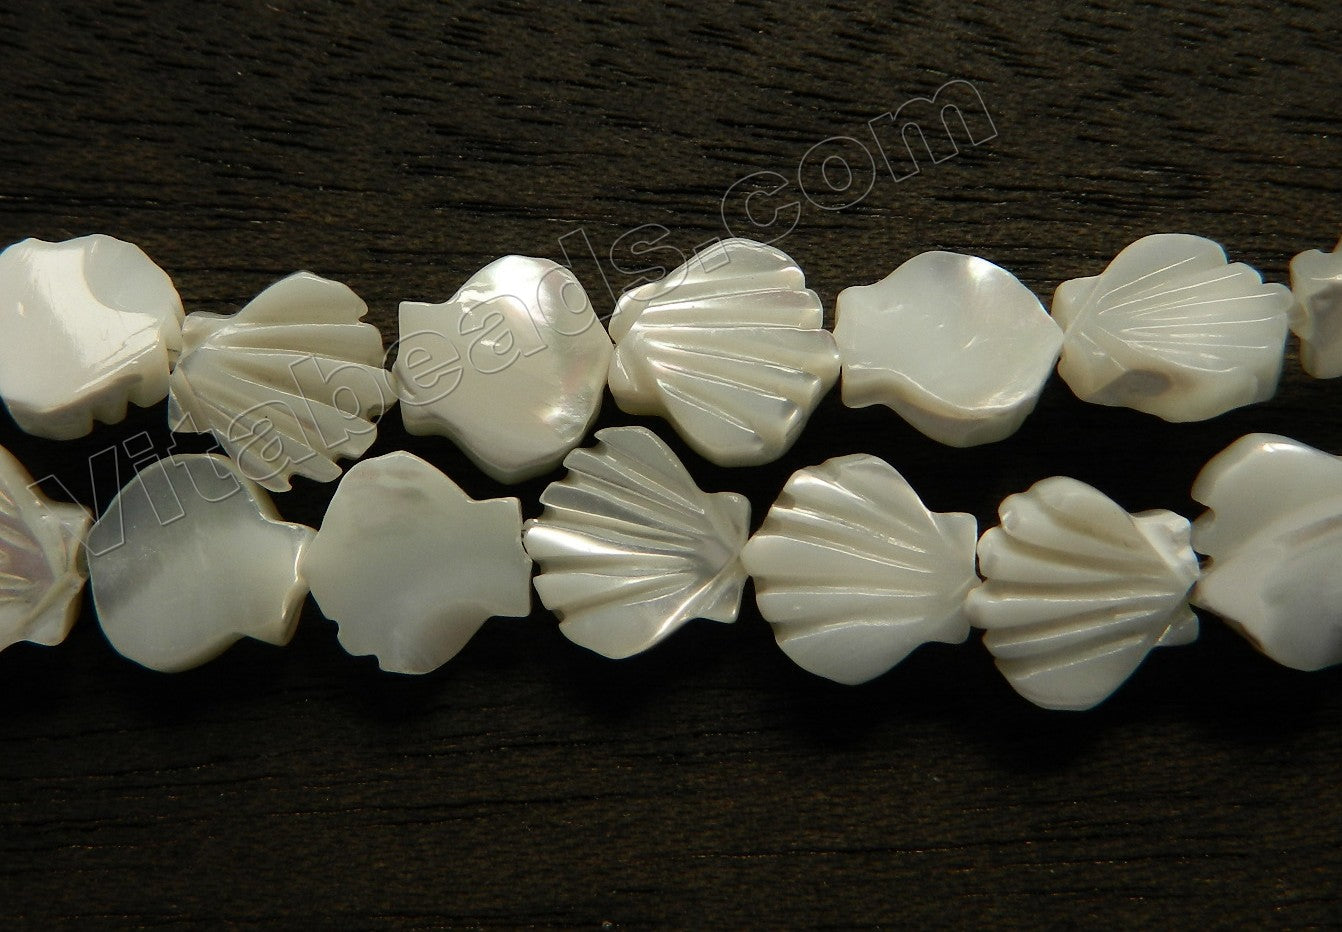 White Sea Shell MOP  -  Carved Shell Beads  16"   